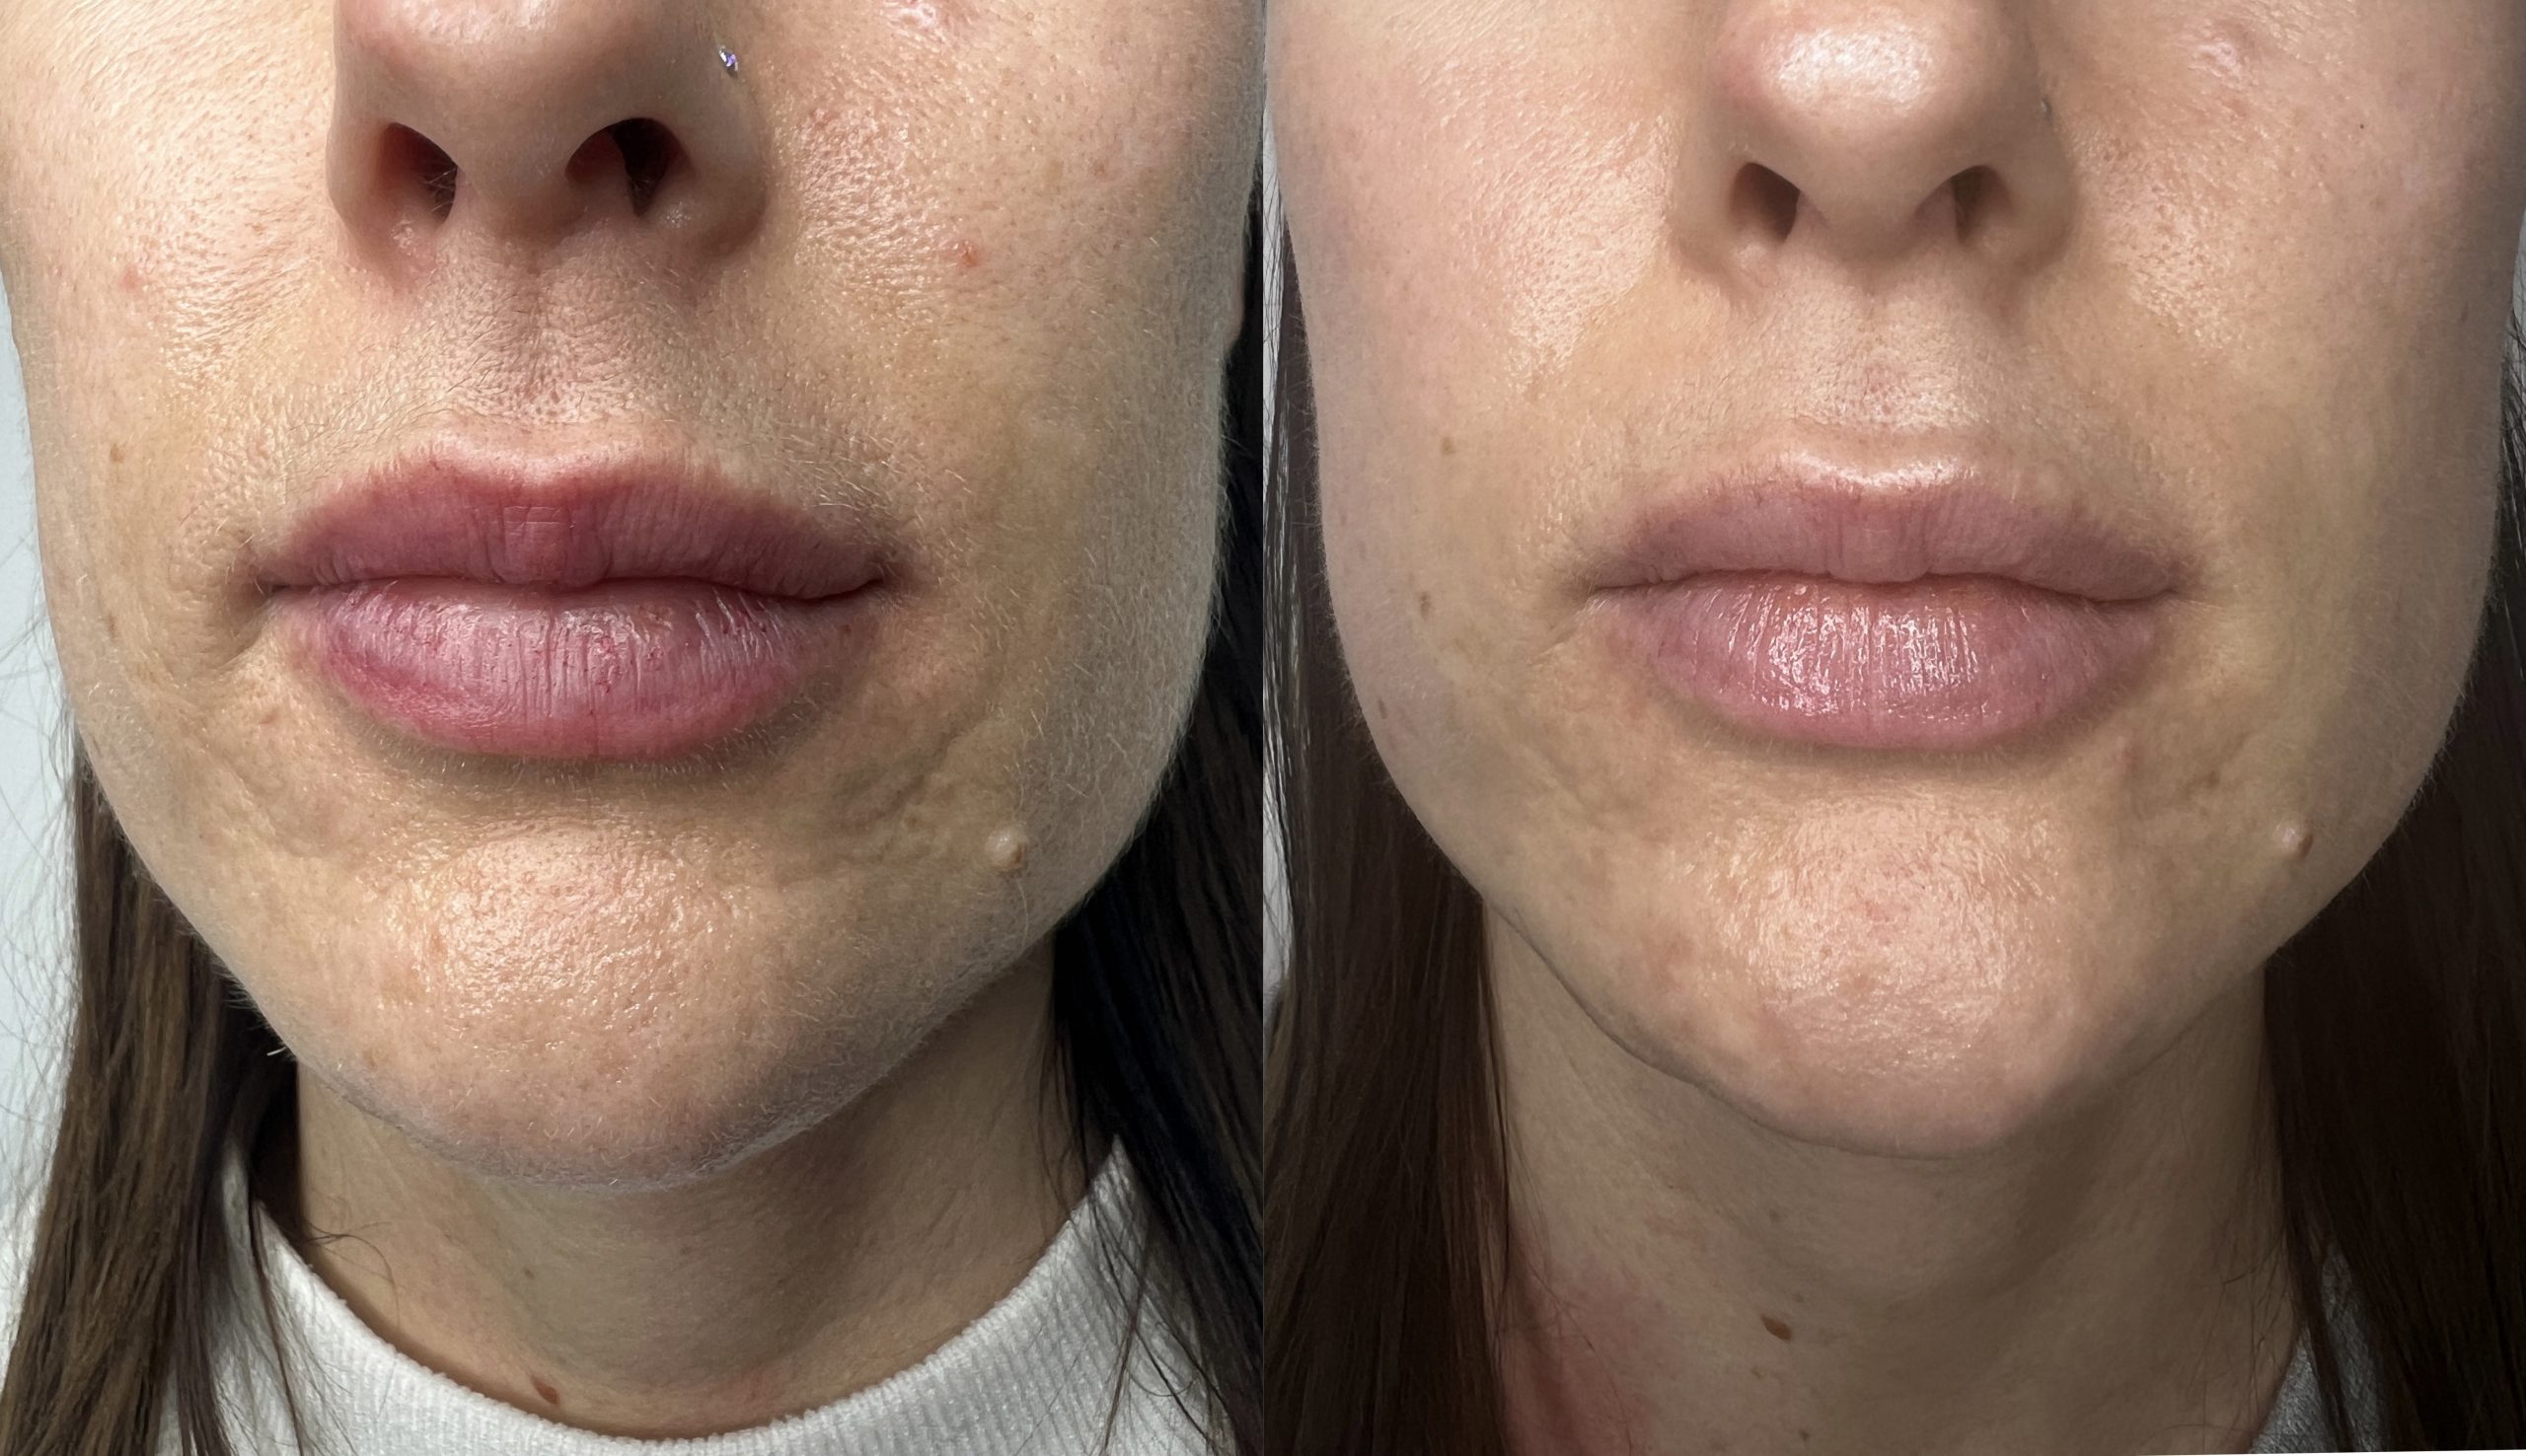 CO2 Laser Resurfacing Before & After Pictures